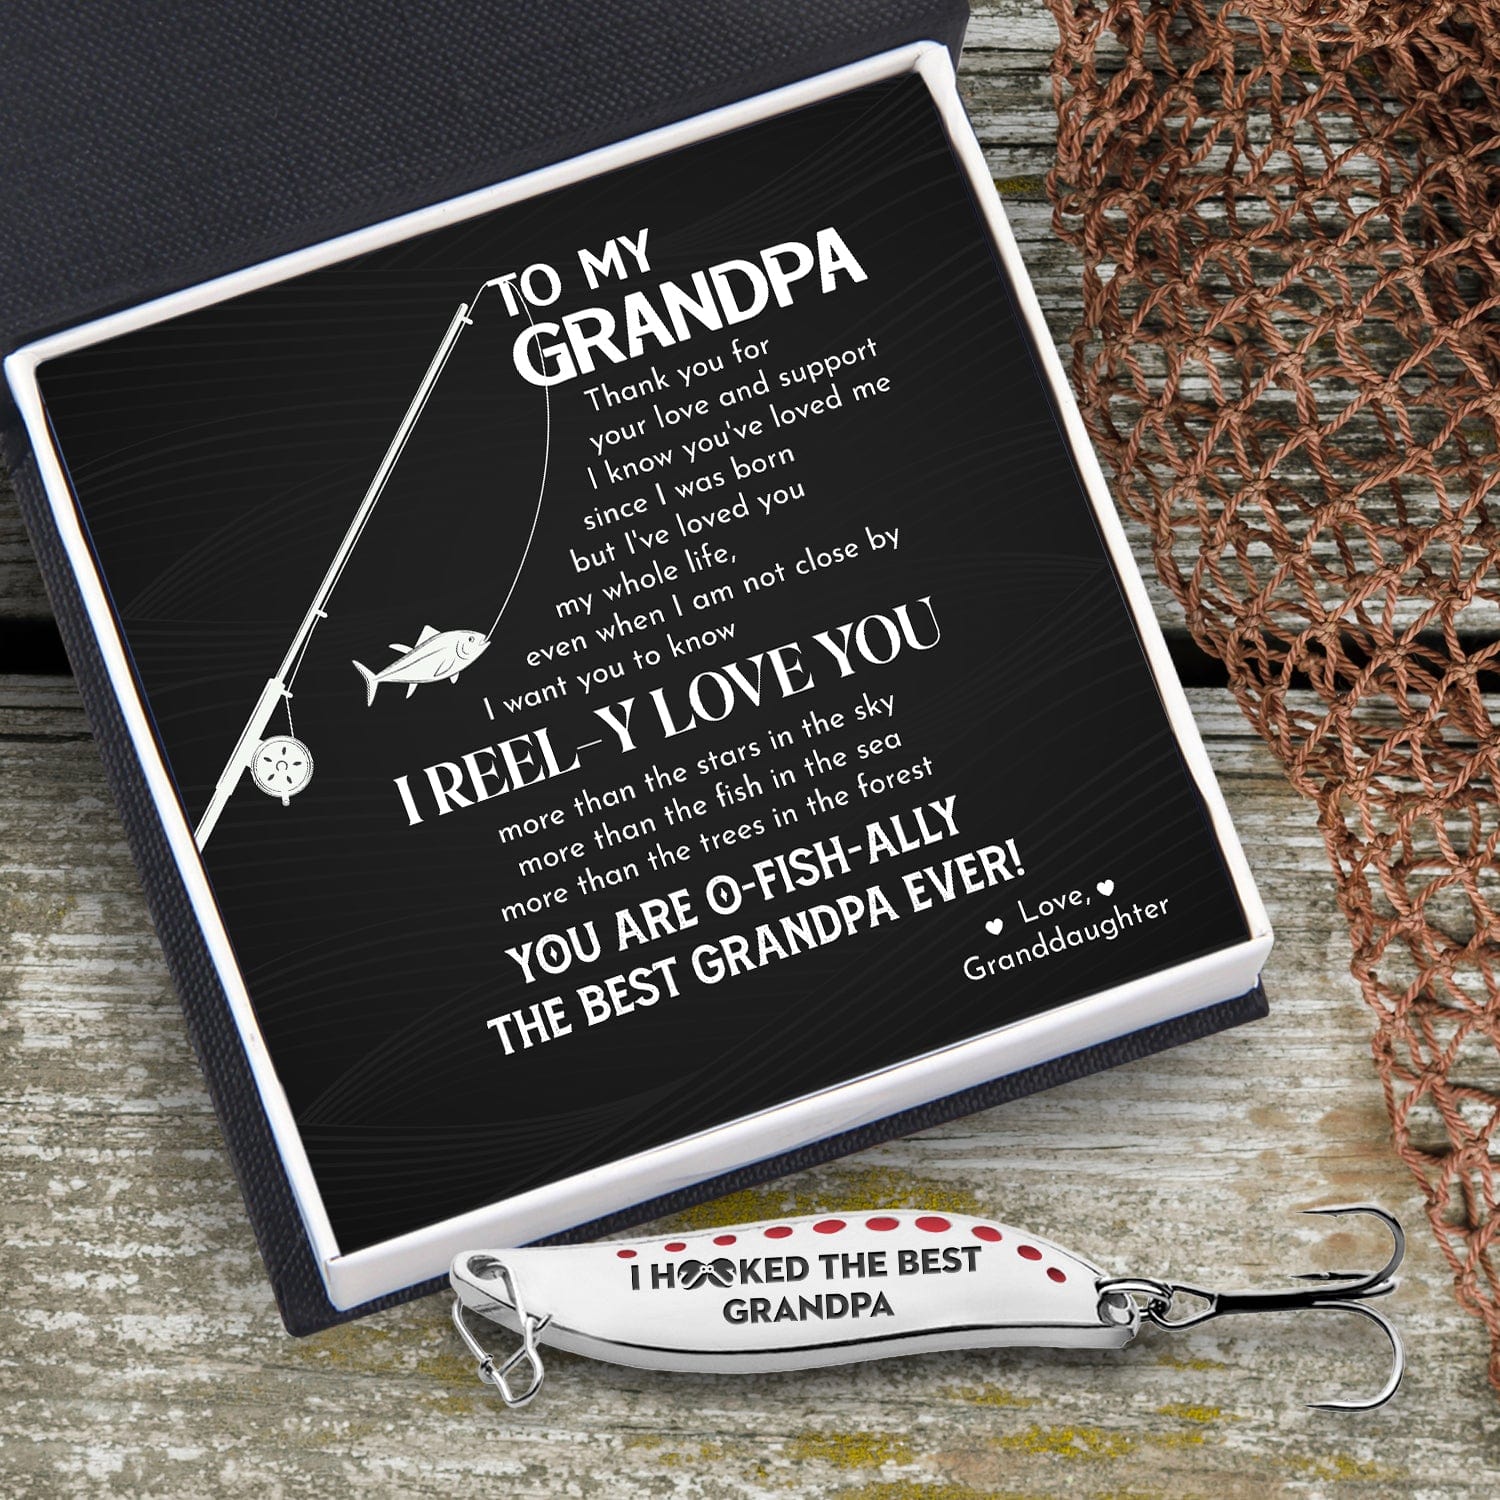 Fishing Lures - Fishing - To My Grandpa - From Granddaughter - I